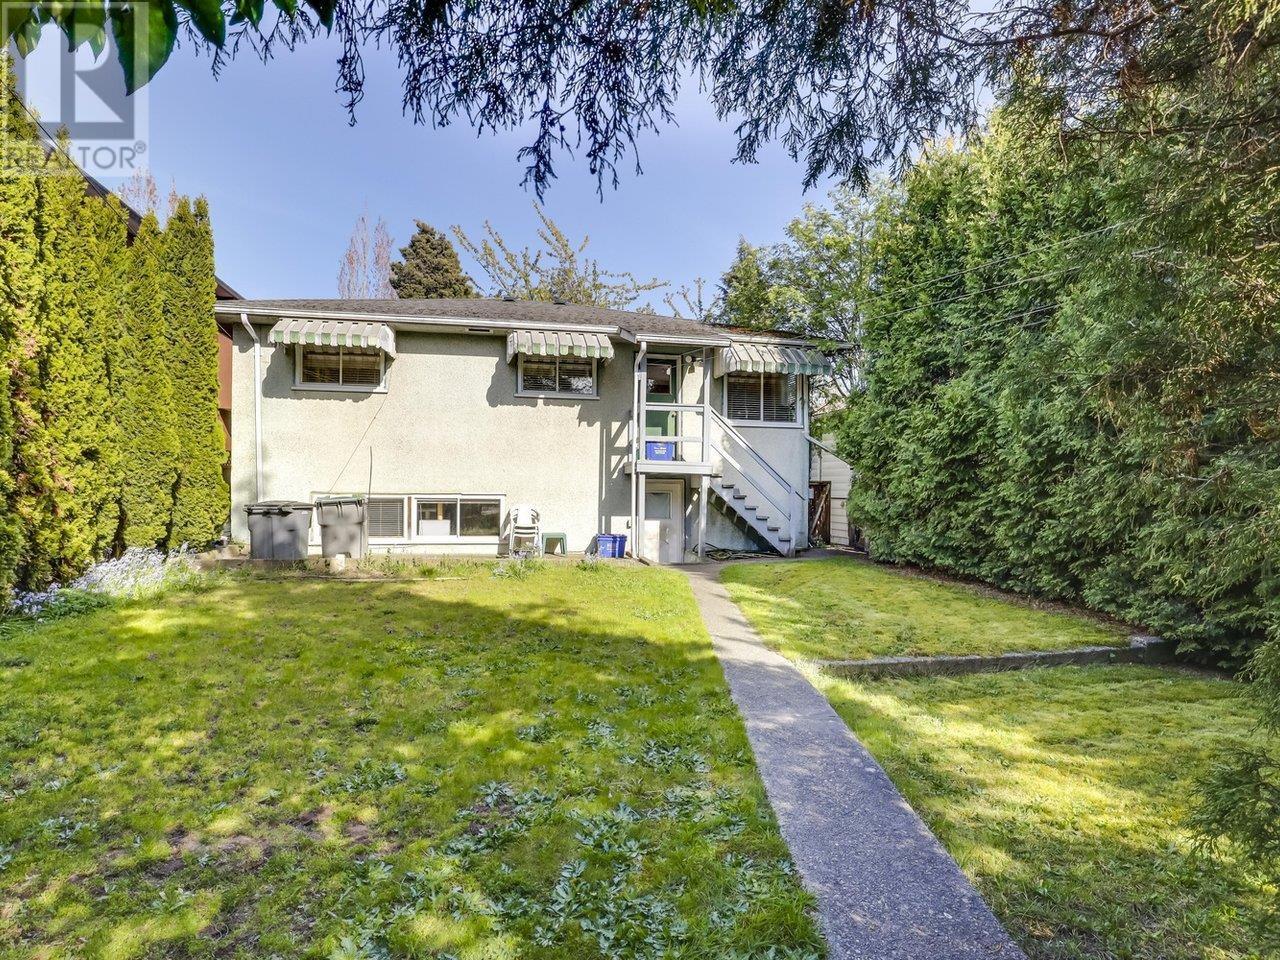 Listing Picture 23 of 25 : 7475 KNIGHT STREET, Vancouver / 溫哥華 - 魯藝地產 Yvonne Lu Group - MLS Medallion Club Member